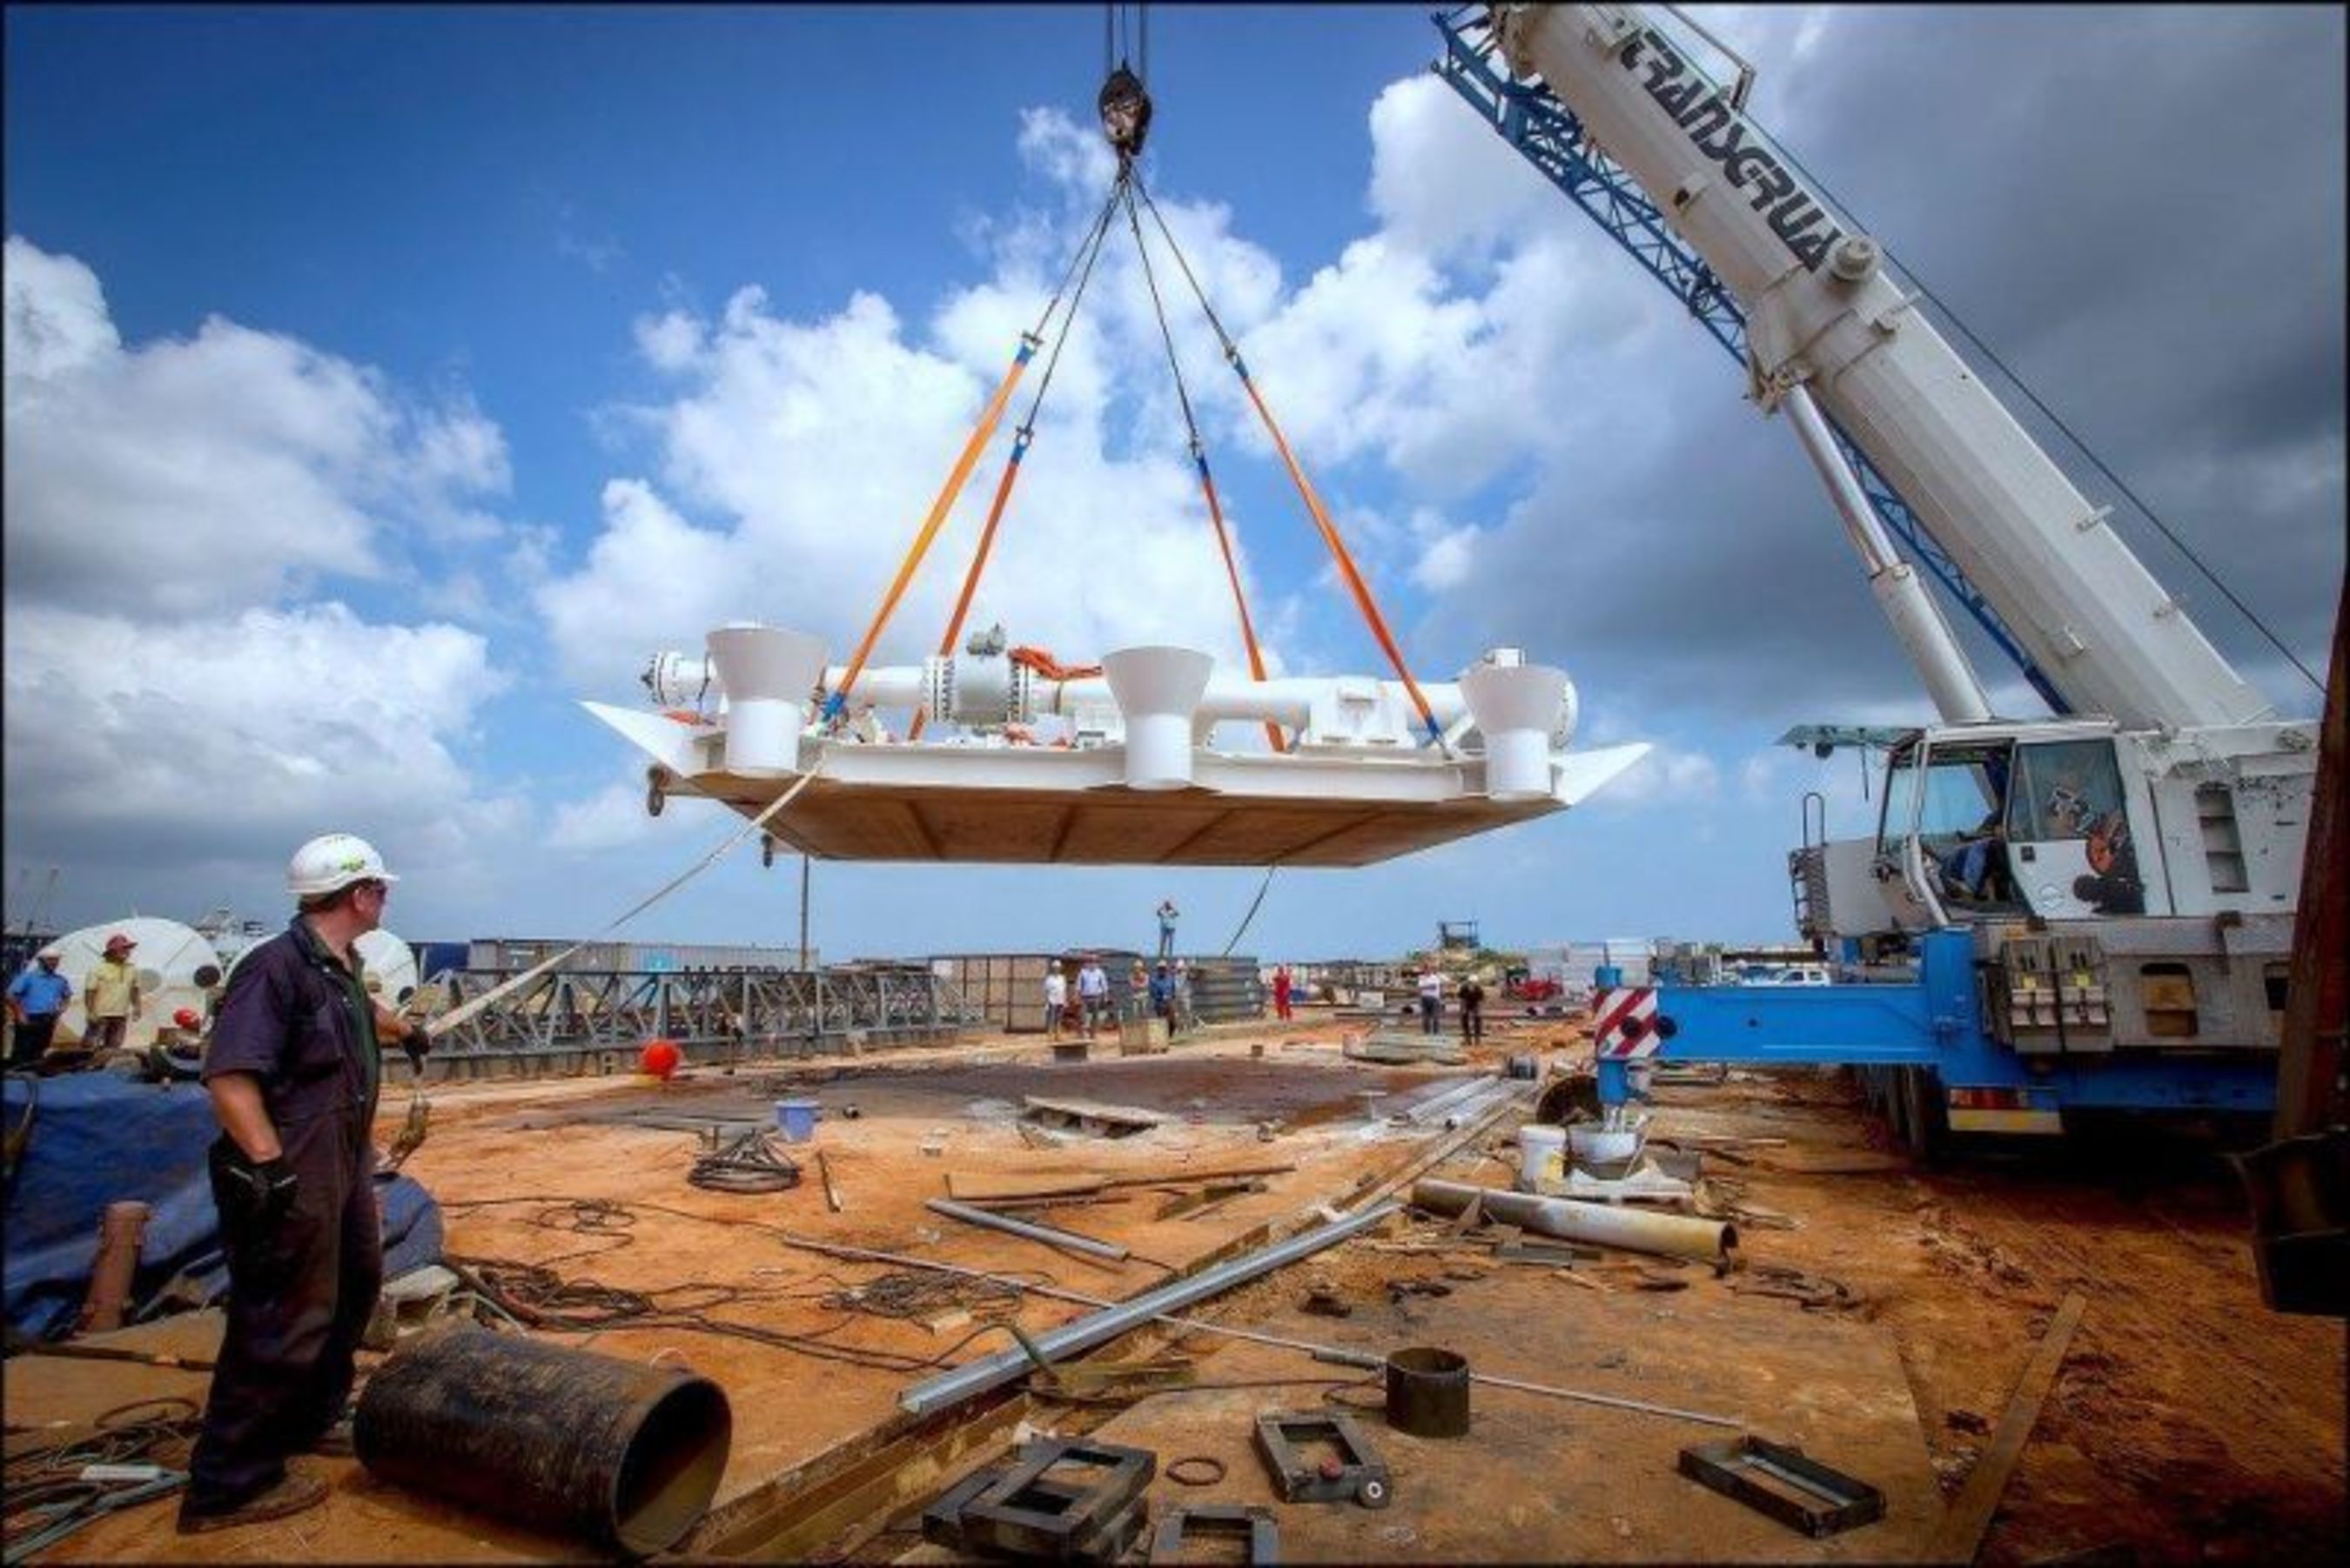 Lifting of the manifold that will take part in Puma Energyâeuro(TM)s offshore fuelling facilities in Angola âeuro" one of the worldâeuro(TM)s largest (PRNewsFoto/Puma Energy)